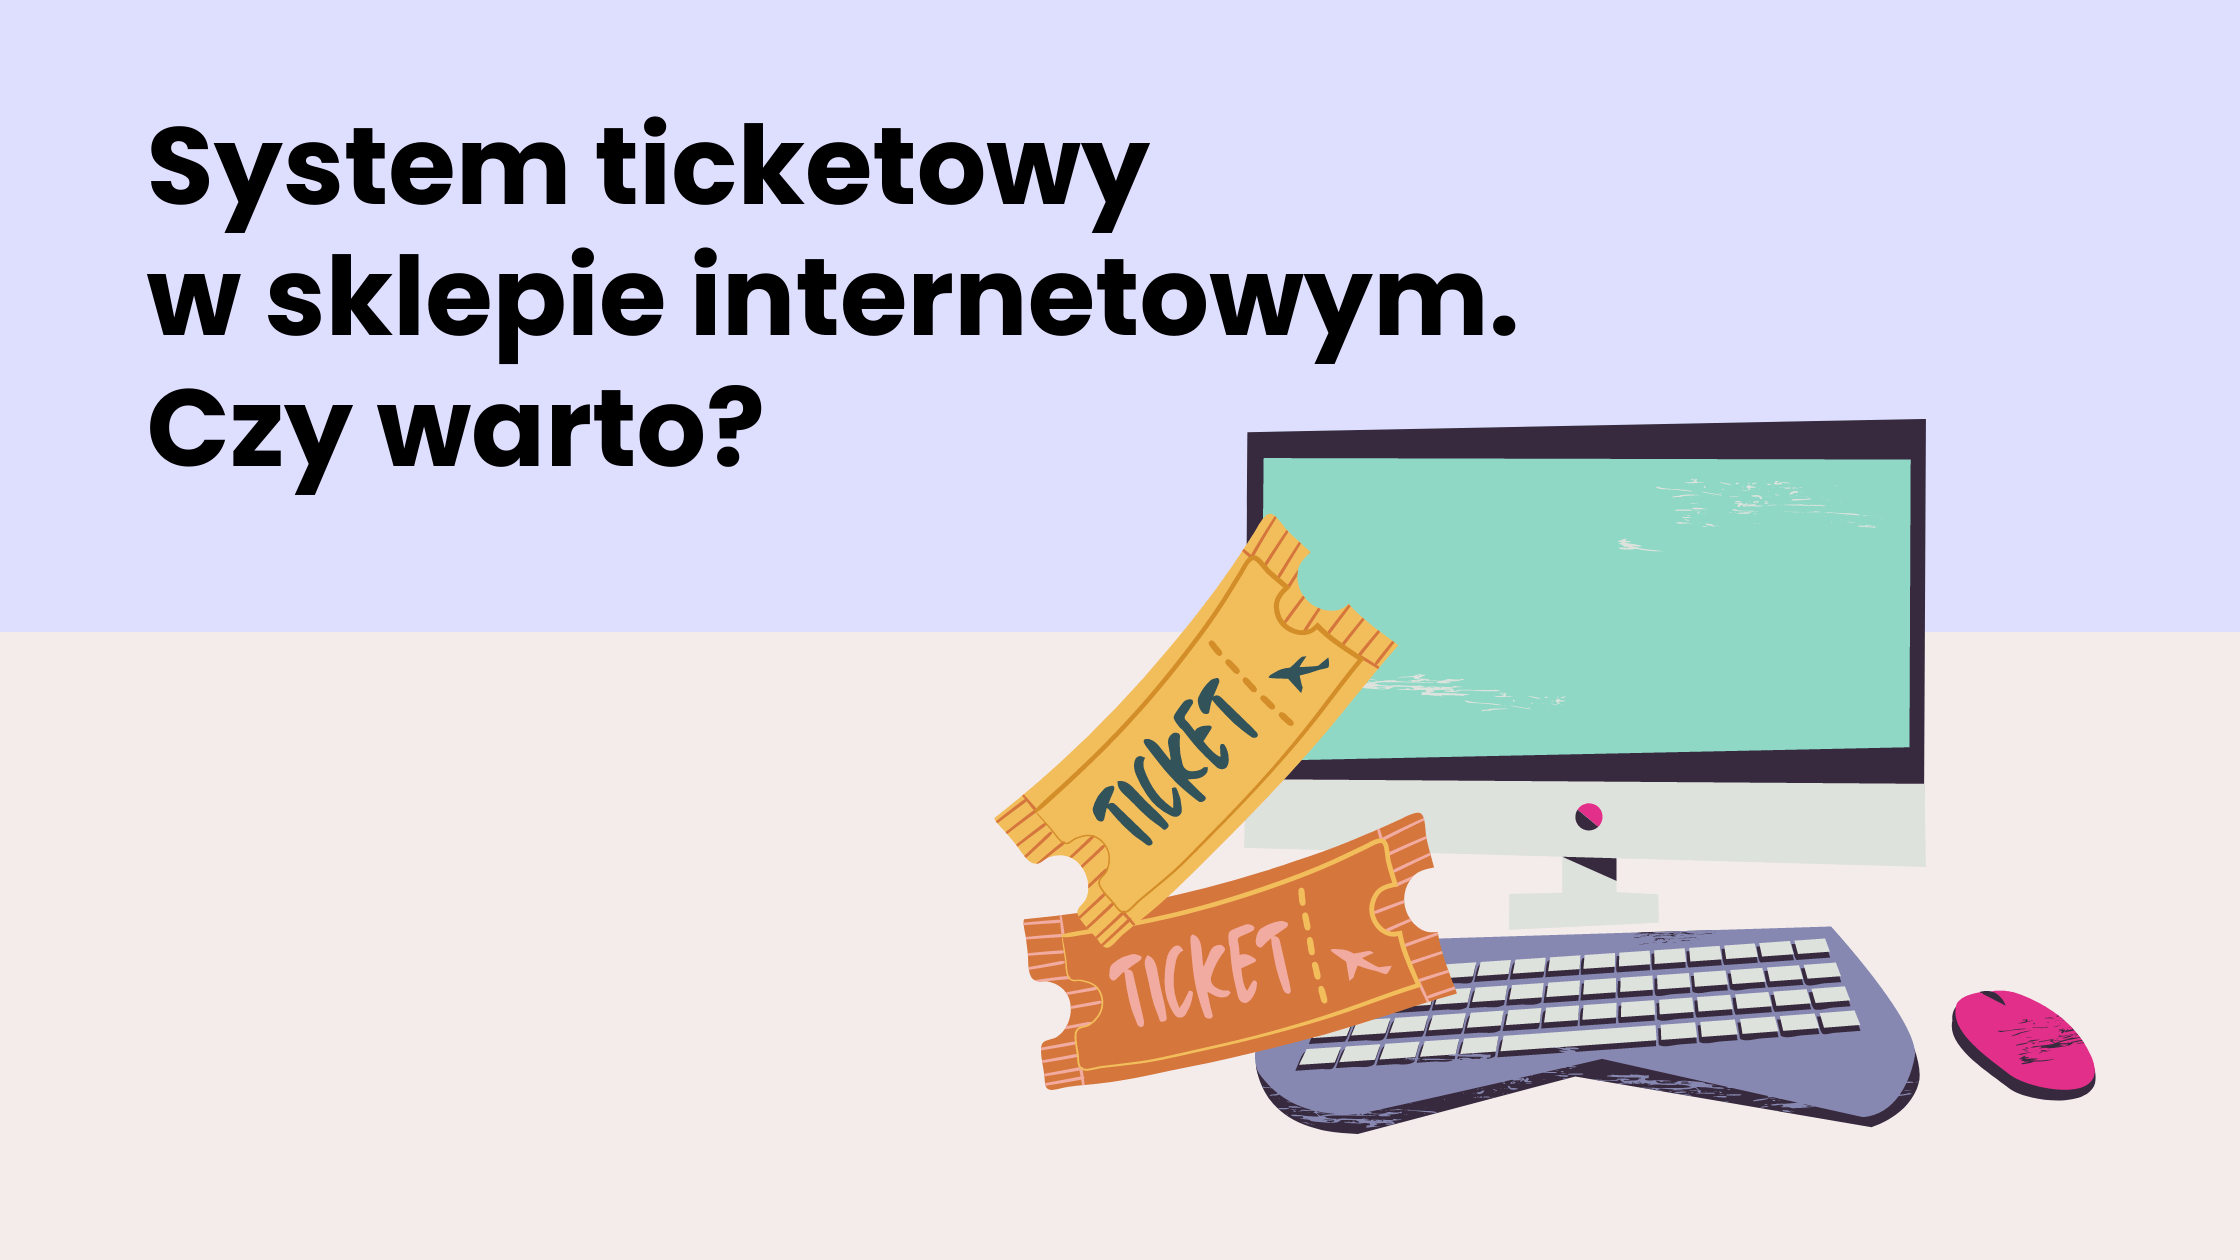 System ticketowy w e-commerce